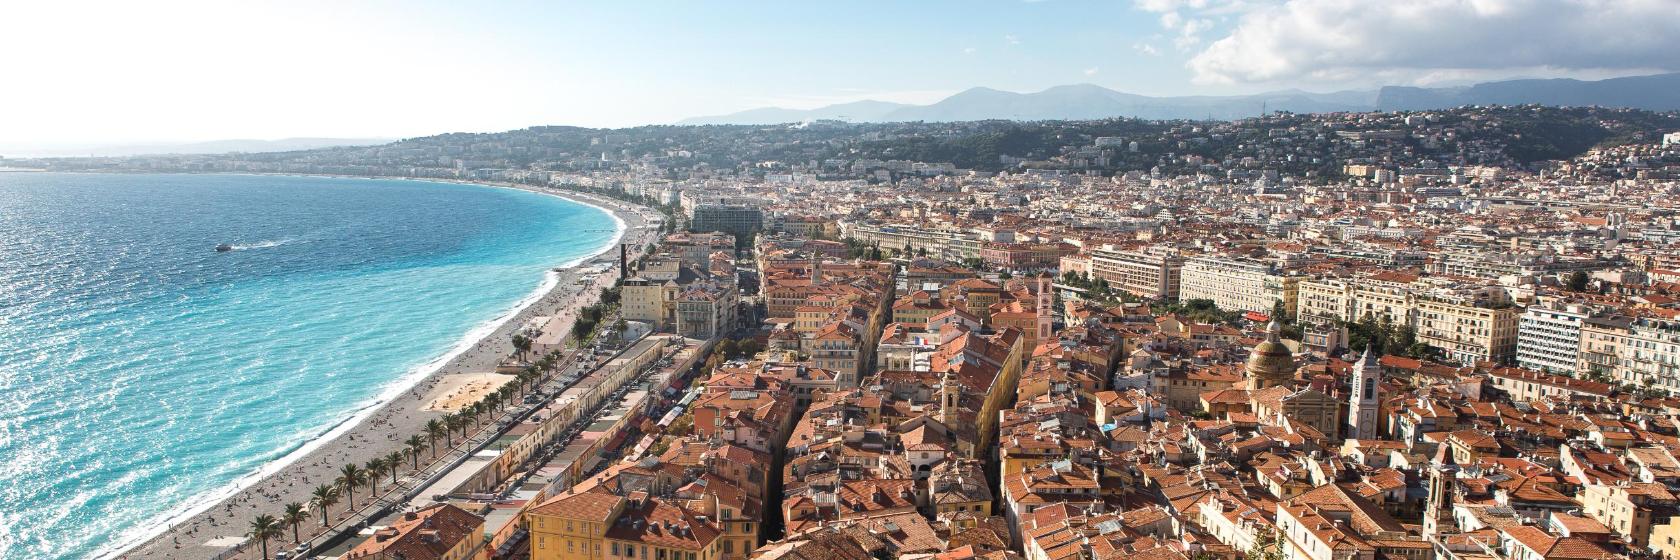 The 10 best hotels & places to stay in Nice, France - Nice hotels